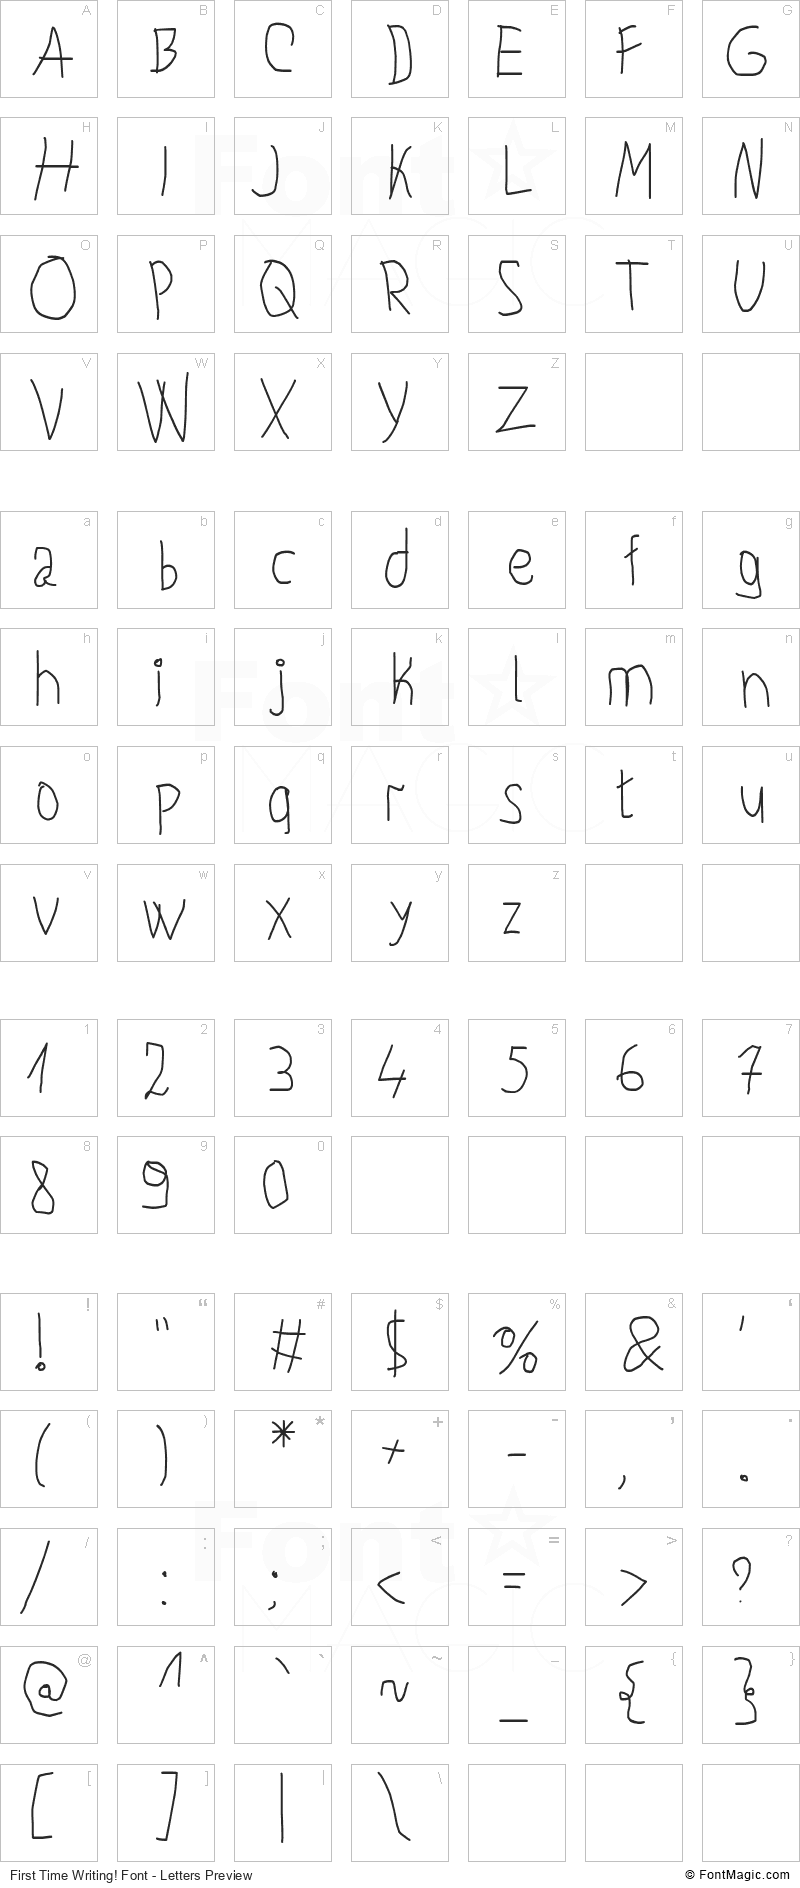 First Time Writing! Font - All Latters Preview Chart